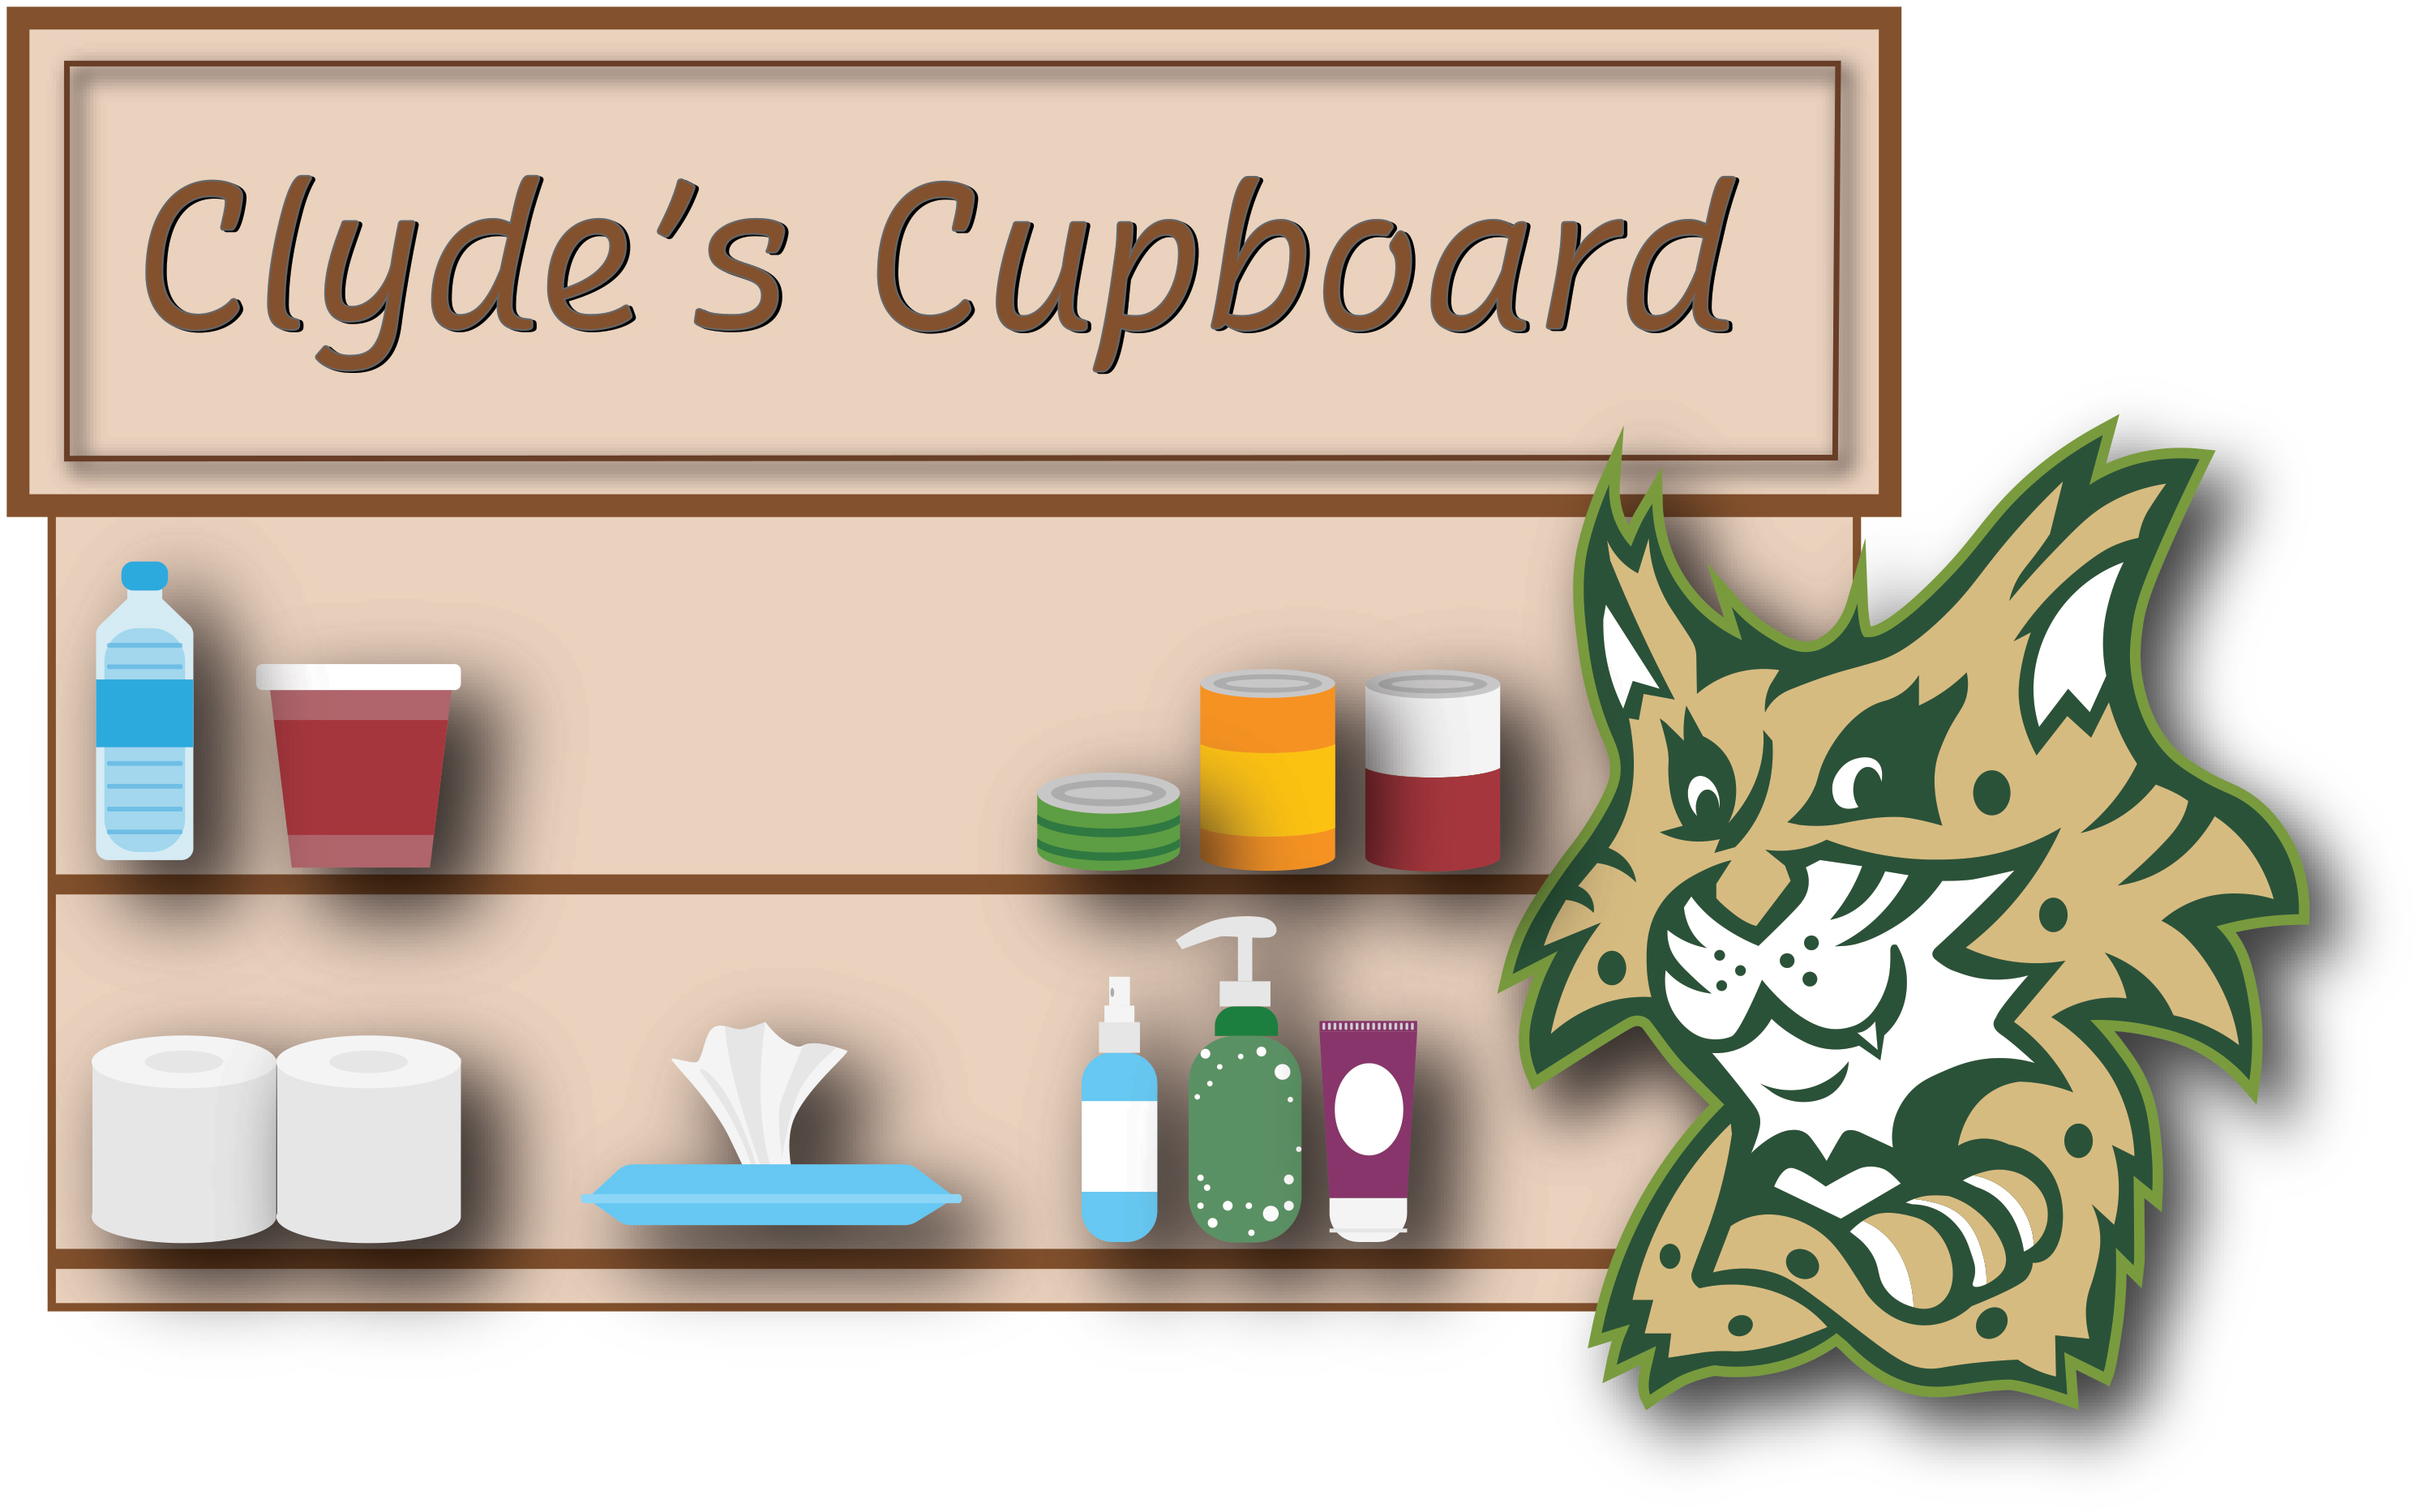 Clyde's Cupboard logo with Clyde standing by food shelves